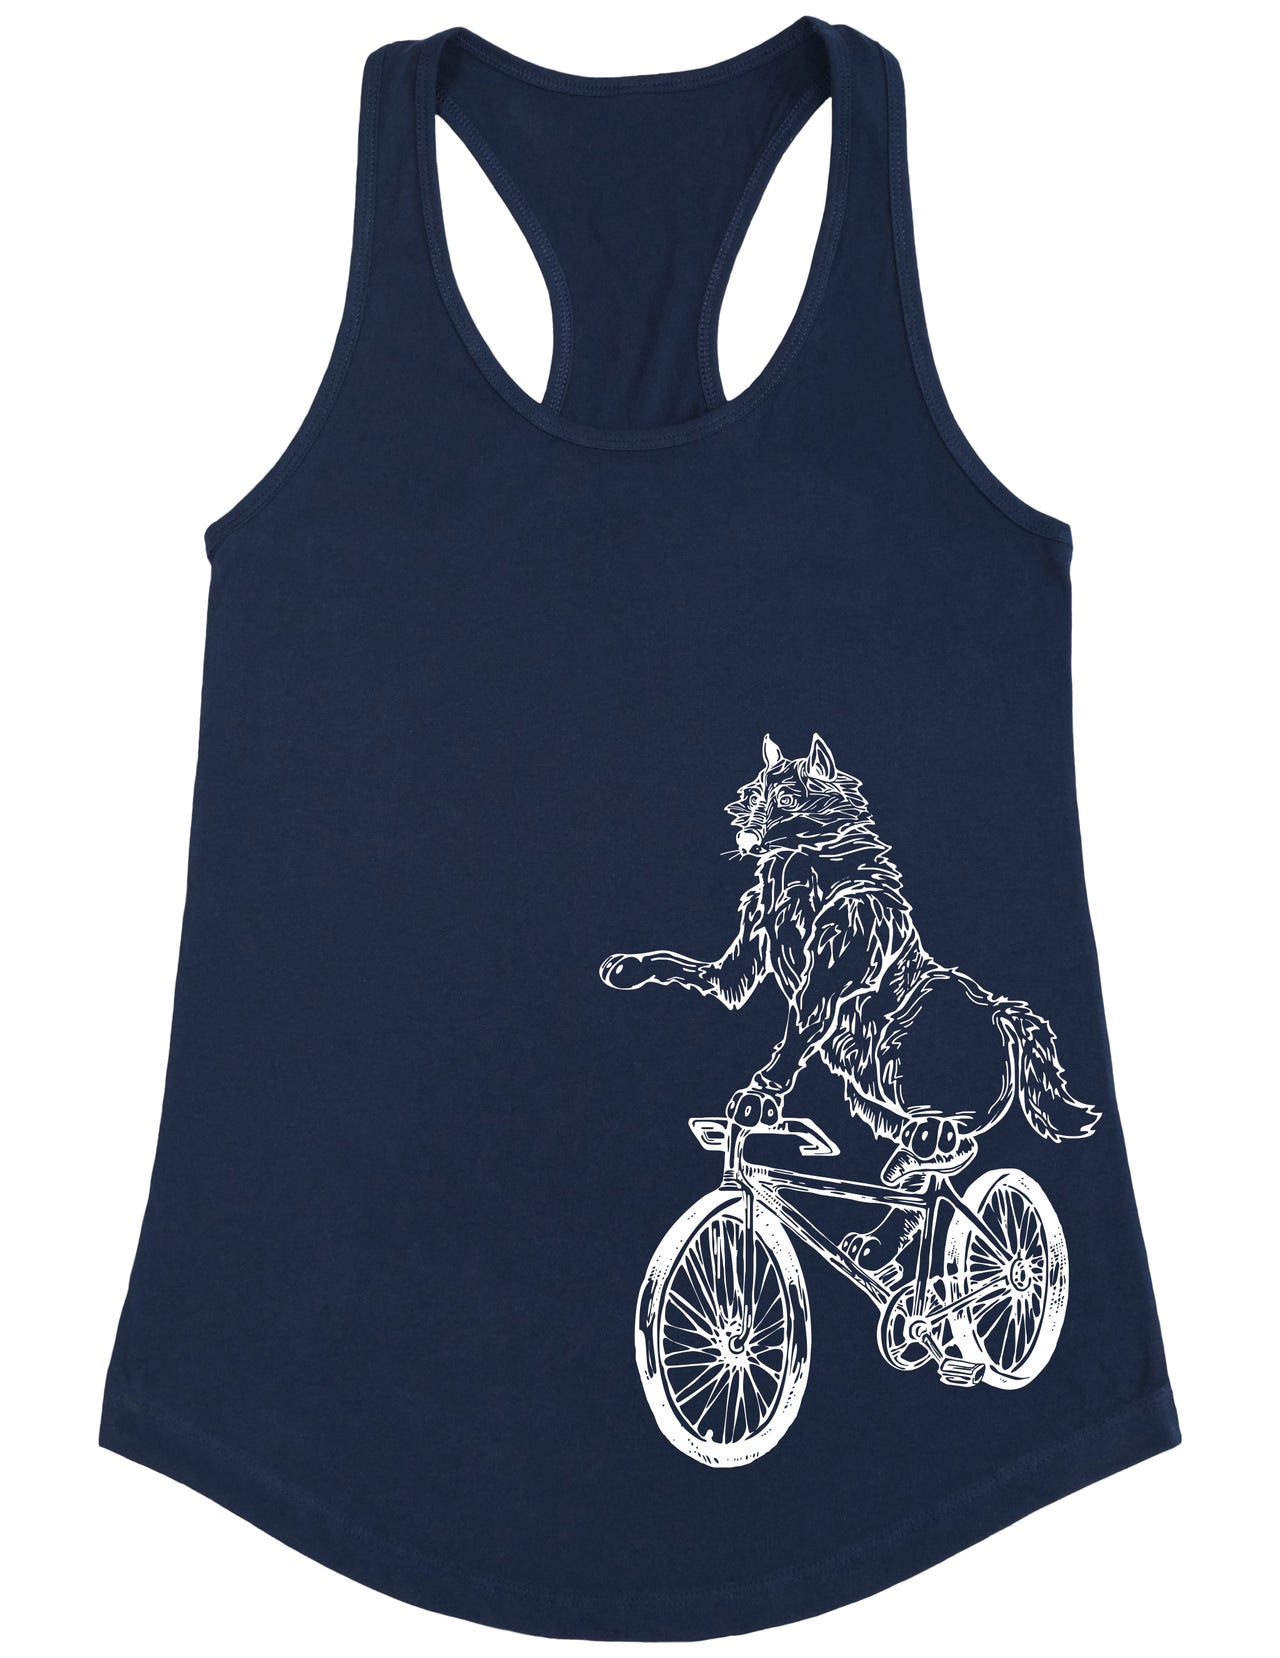 SEEMBO Wolf Cycling Bicycle Women's Poly-Cotton Tank Top Side Print